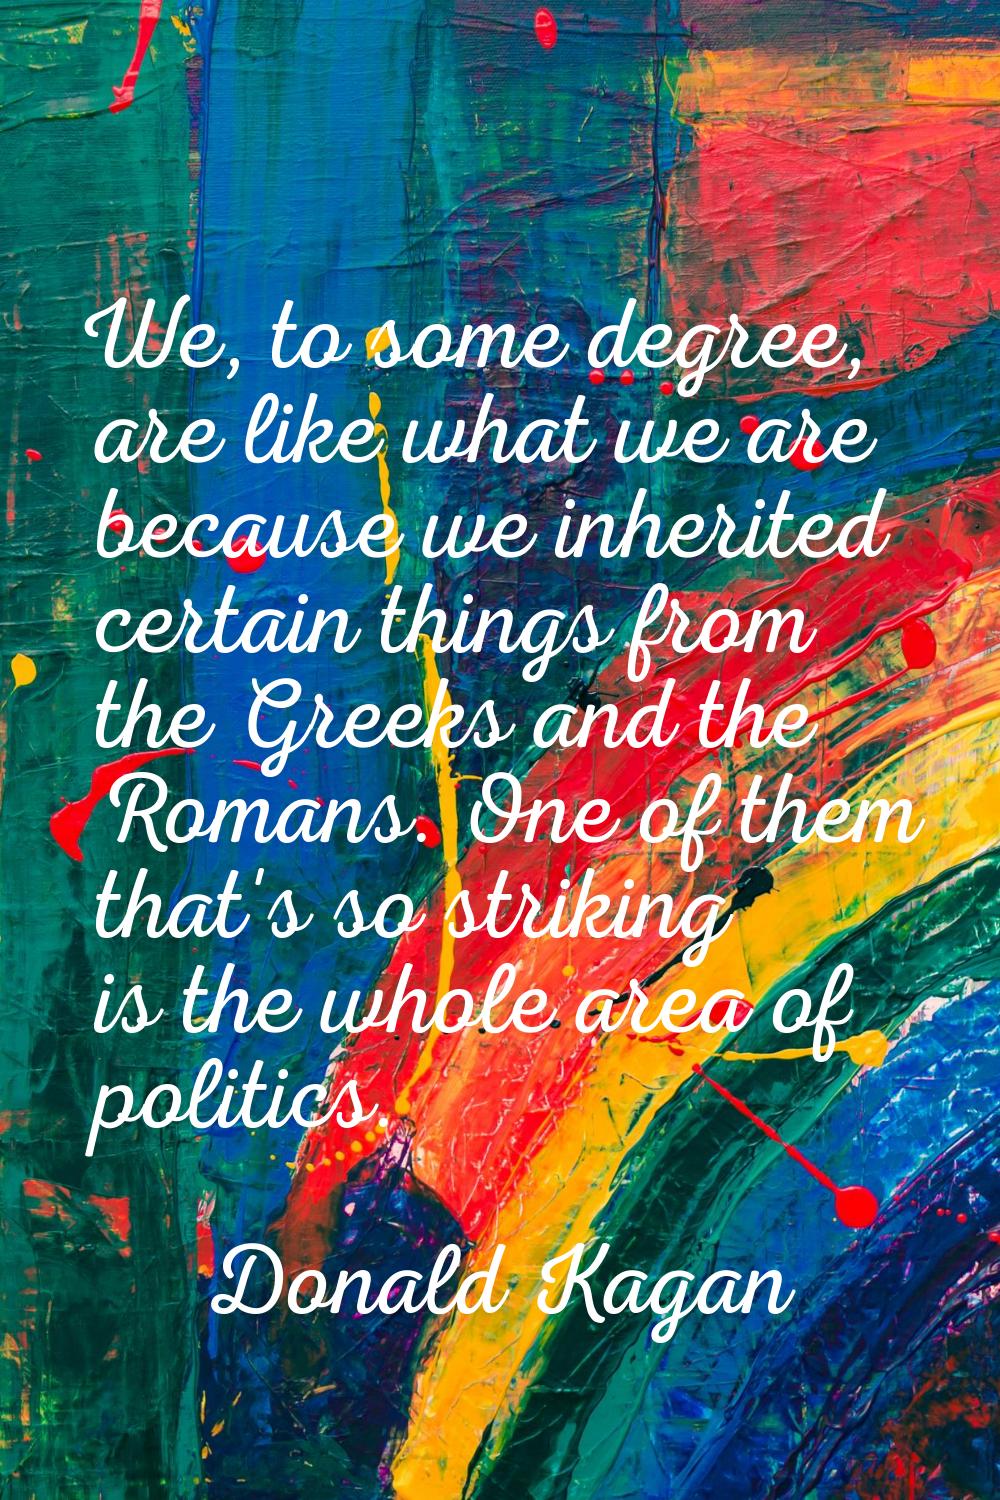 We, to some degree, are like what we are because we inherited certain things from the Greeks and th